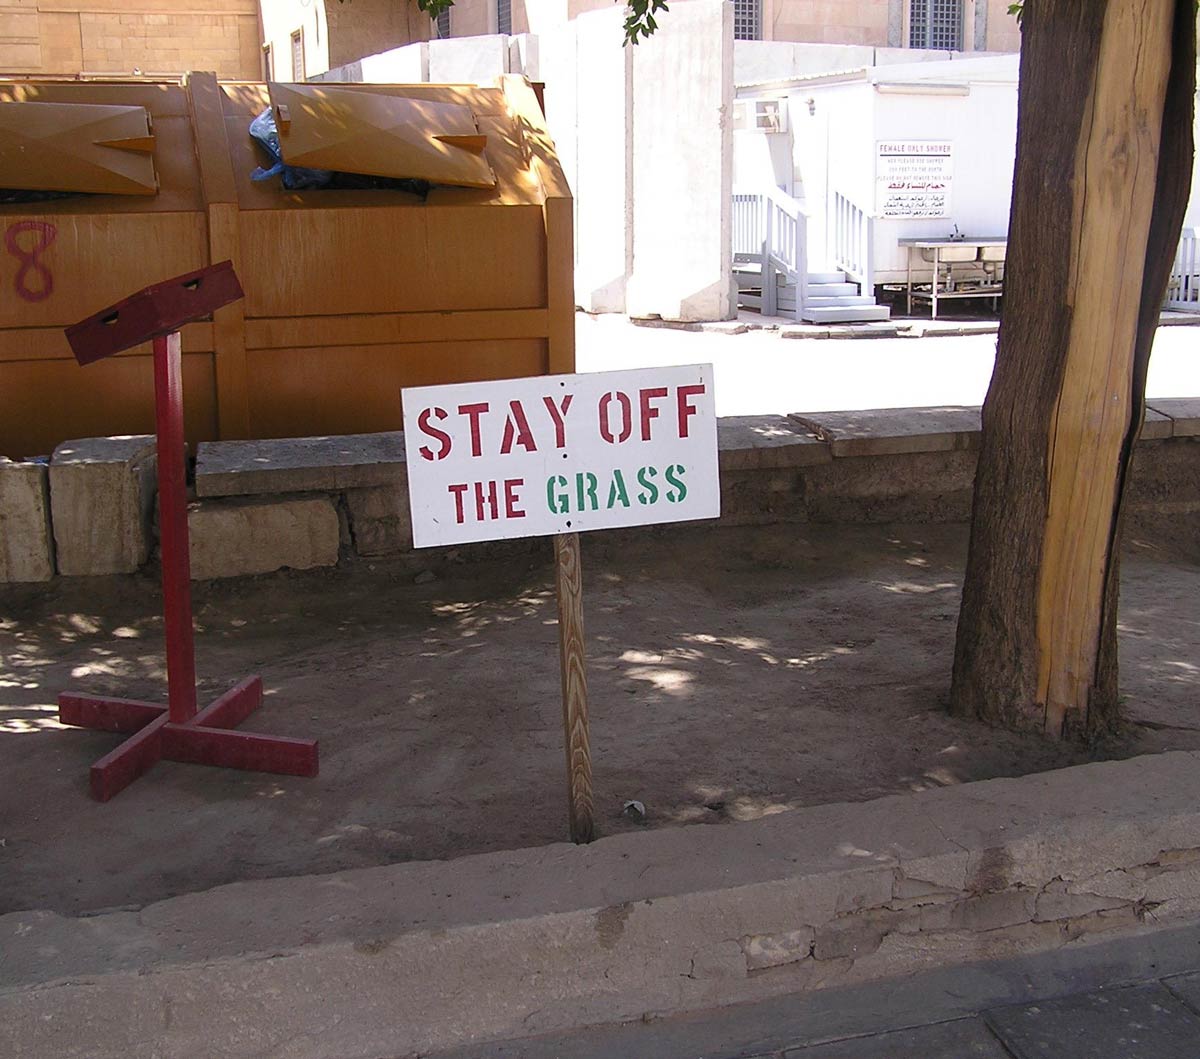 Stay off the Grass! This means you!